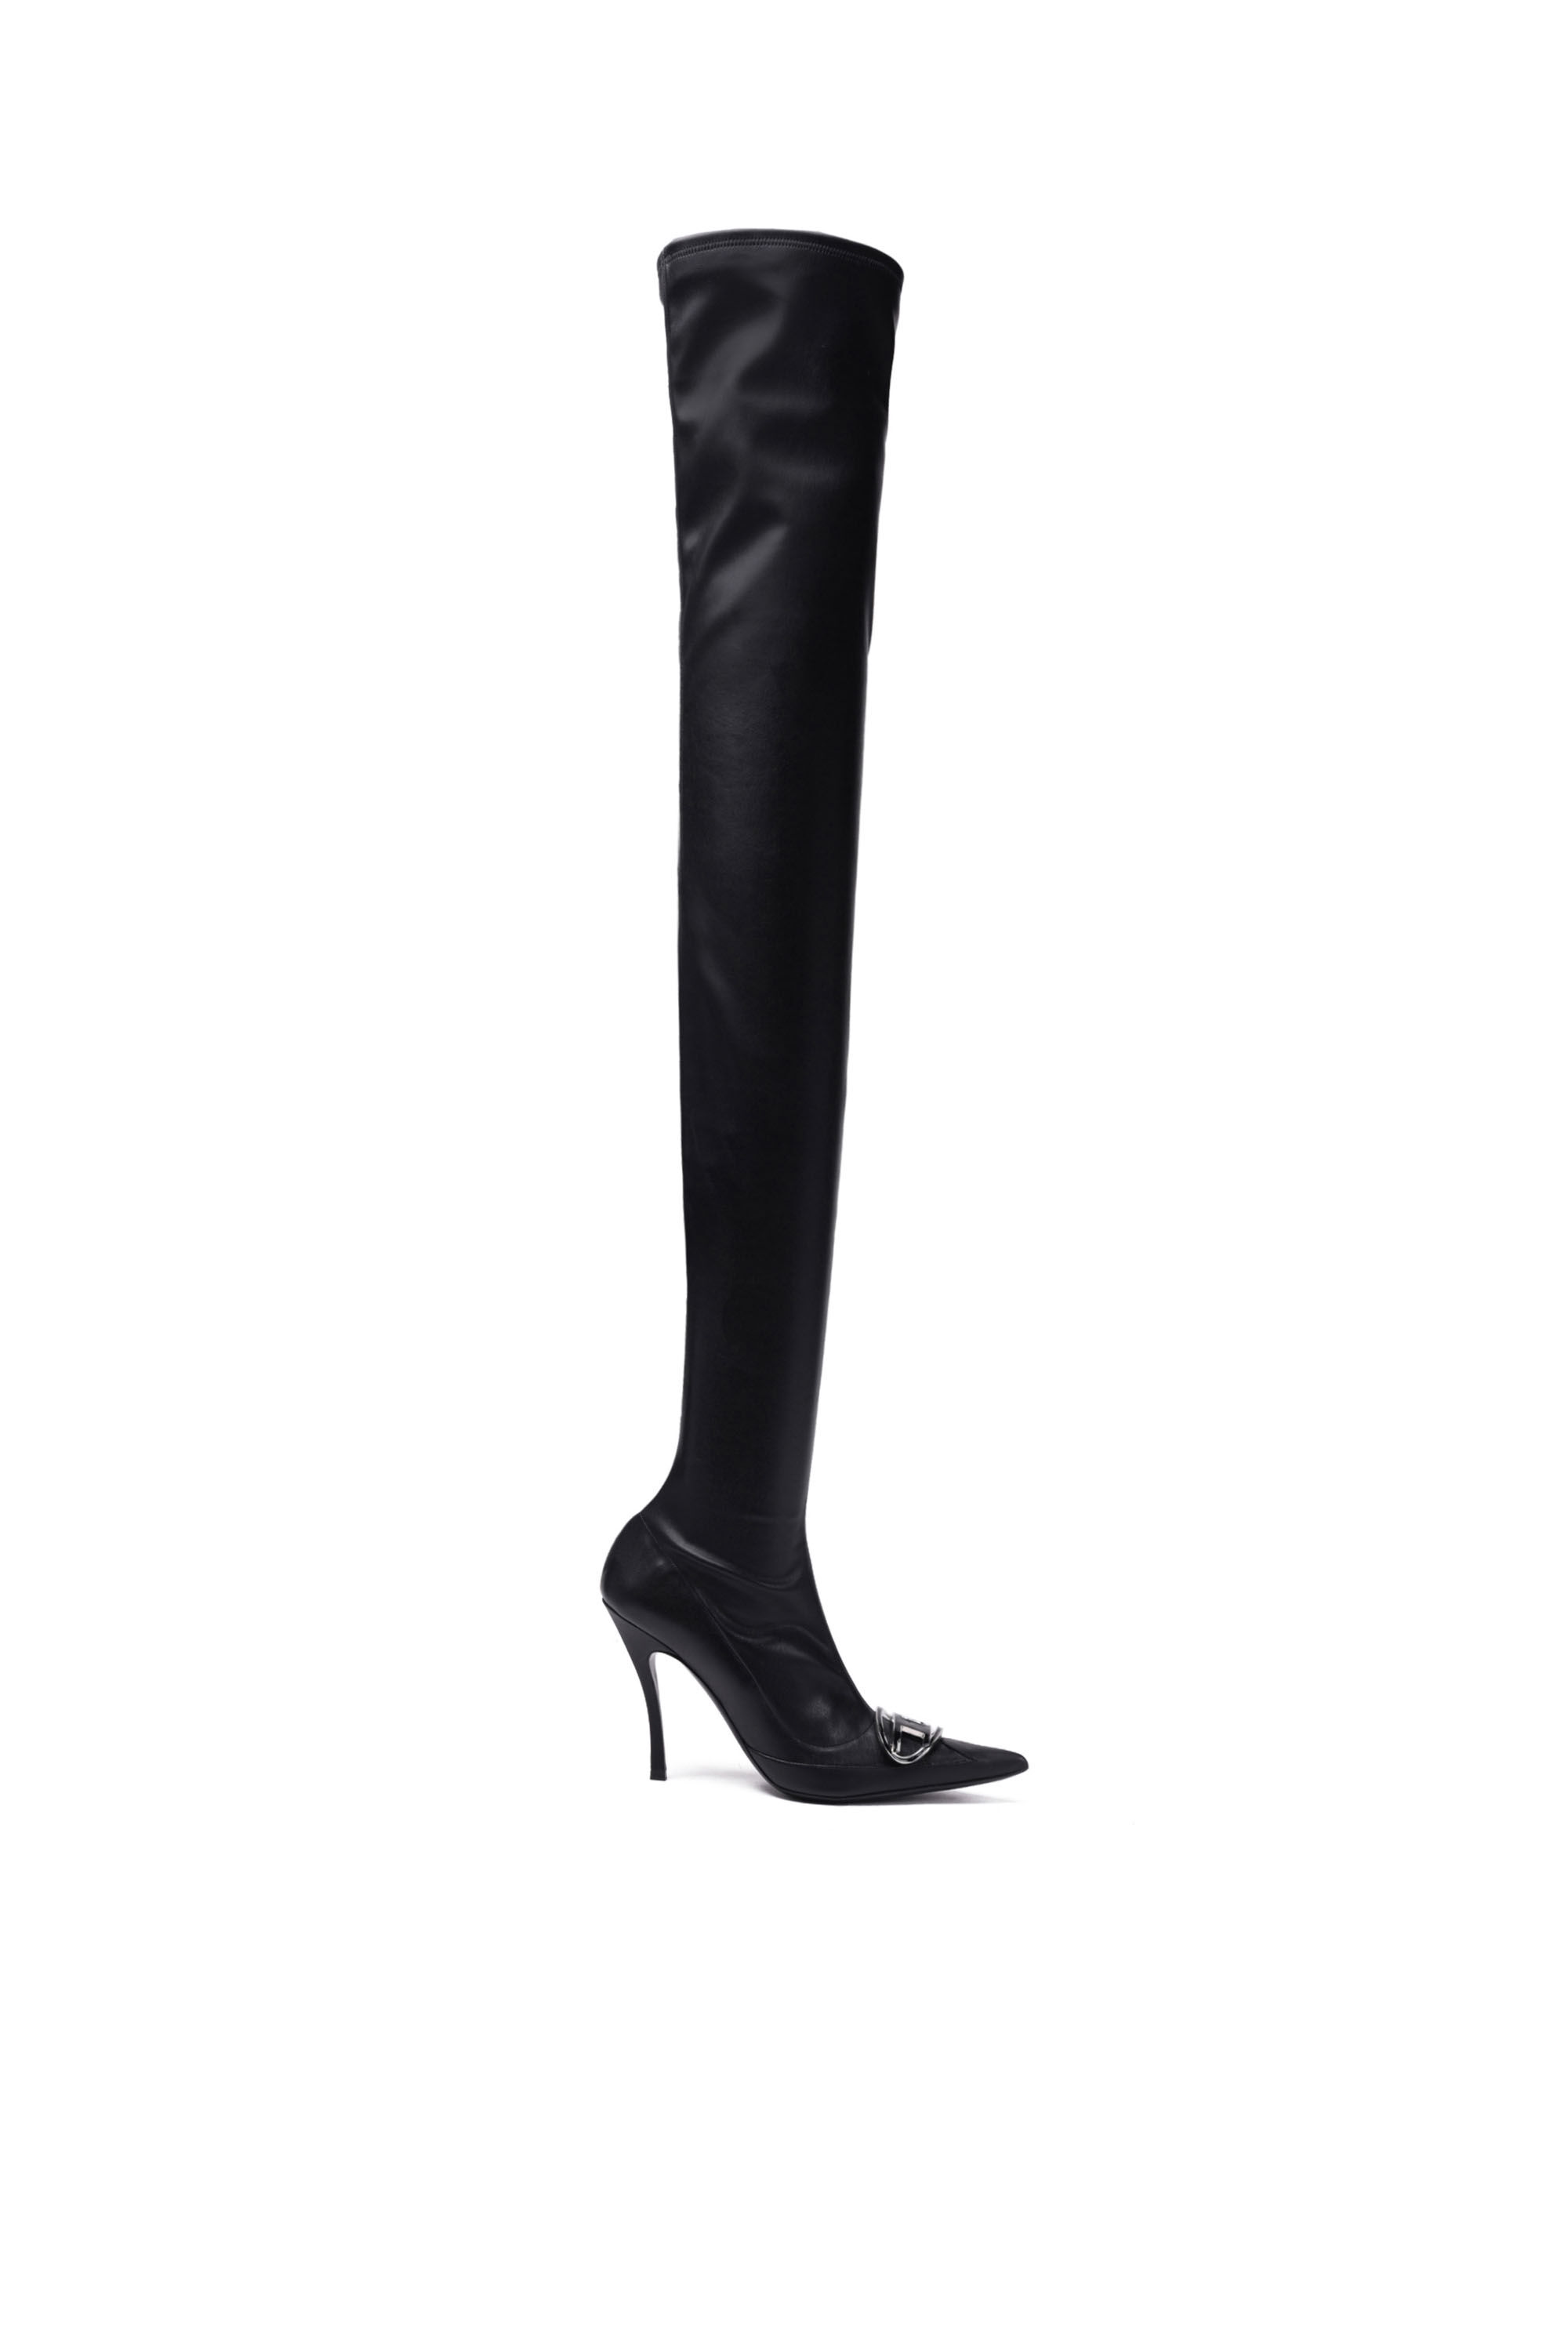 size36【新品】ボッテガヴェネタ thigh high boots サテンニーハイブーツ